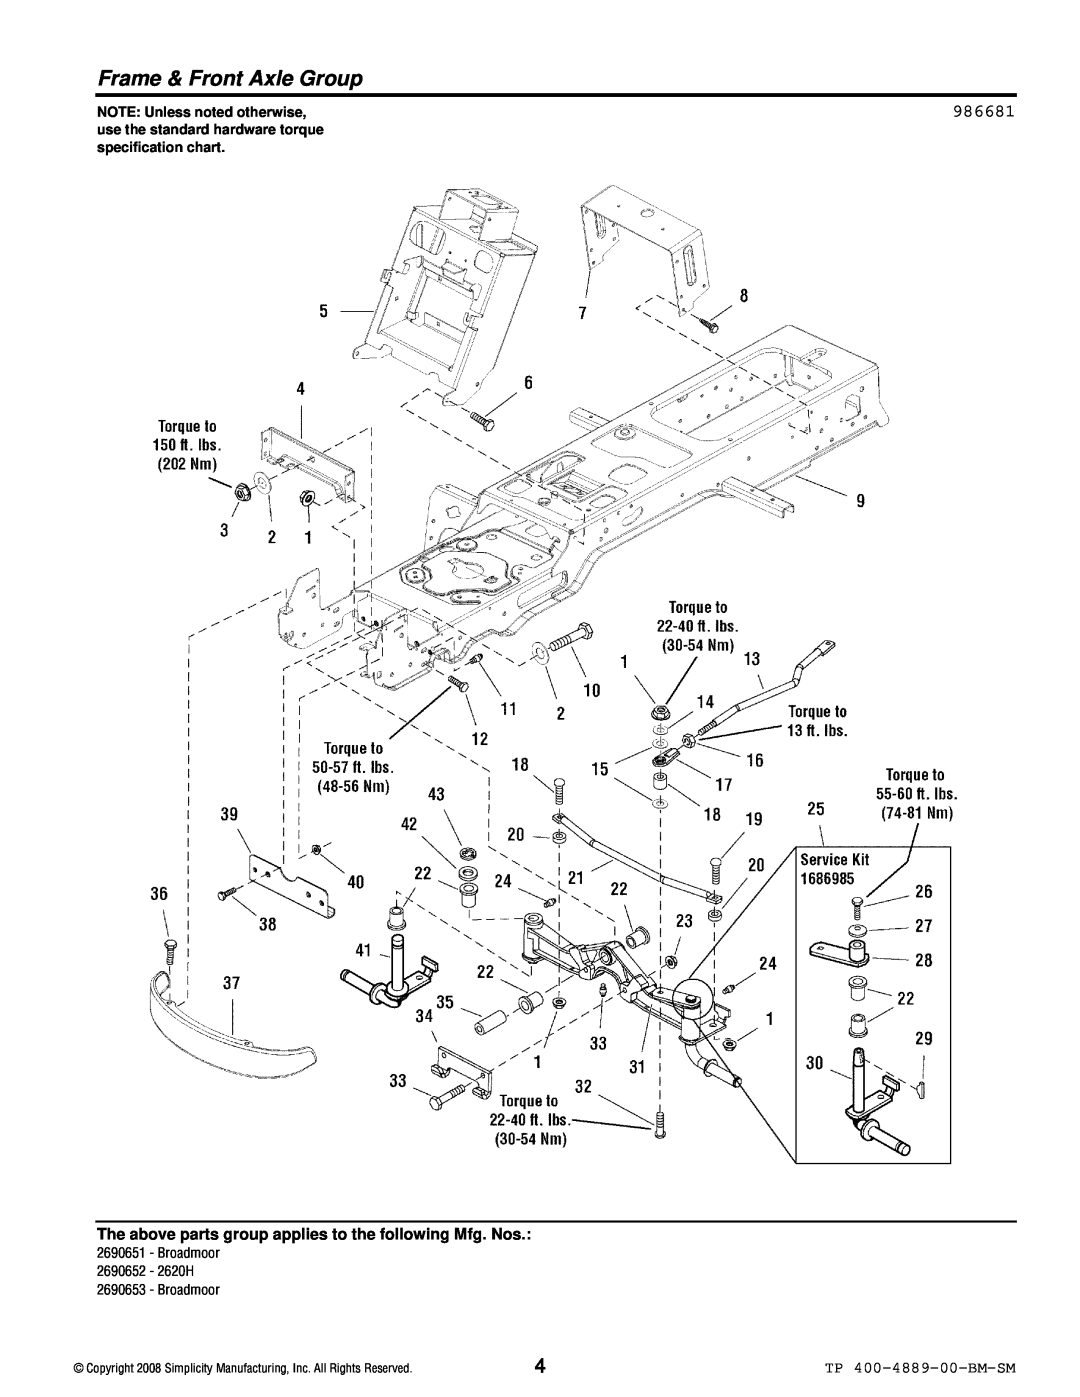 Simplicity 2600 Series manual Frame & Front Axle Group, 986681, TP 400-4889-00-BM-SM, NOTE: Unless noted otherwise 